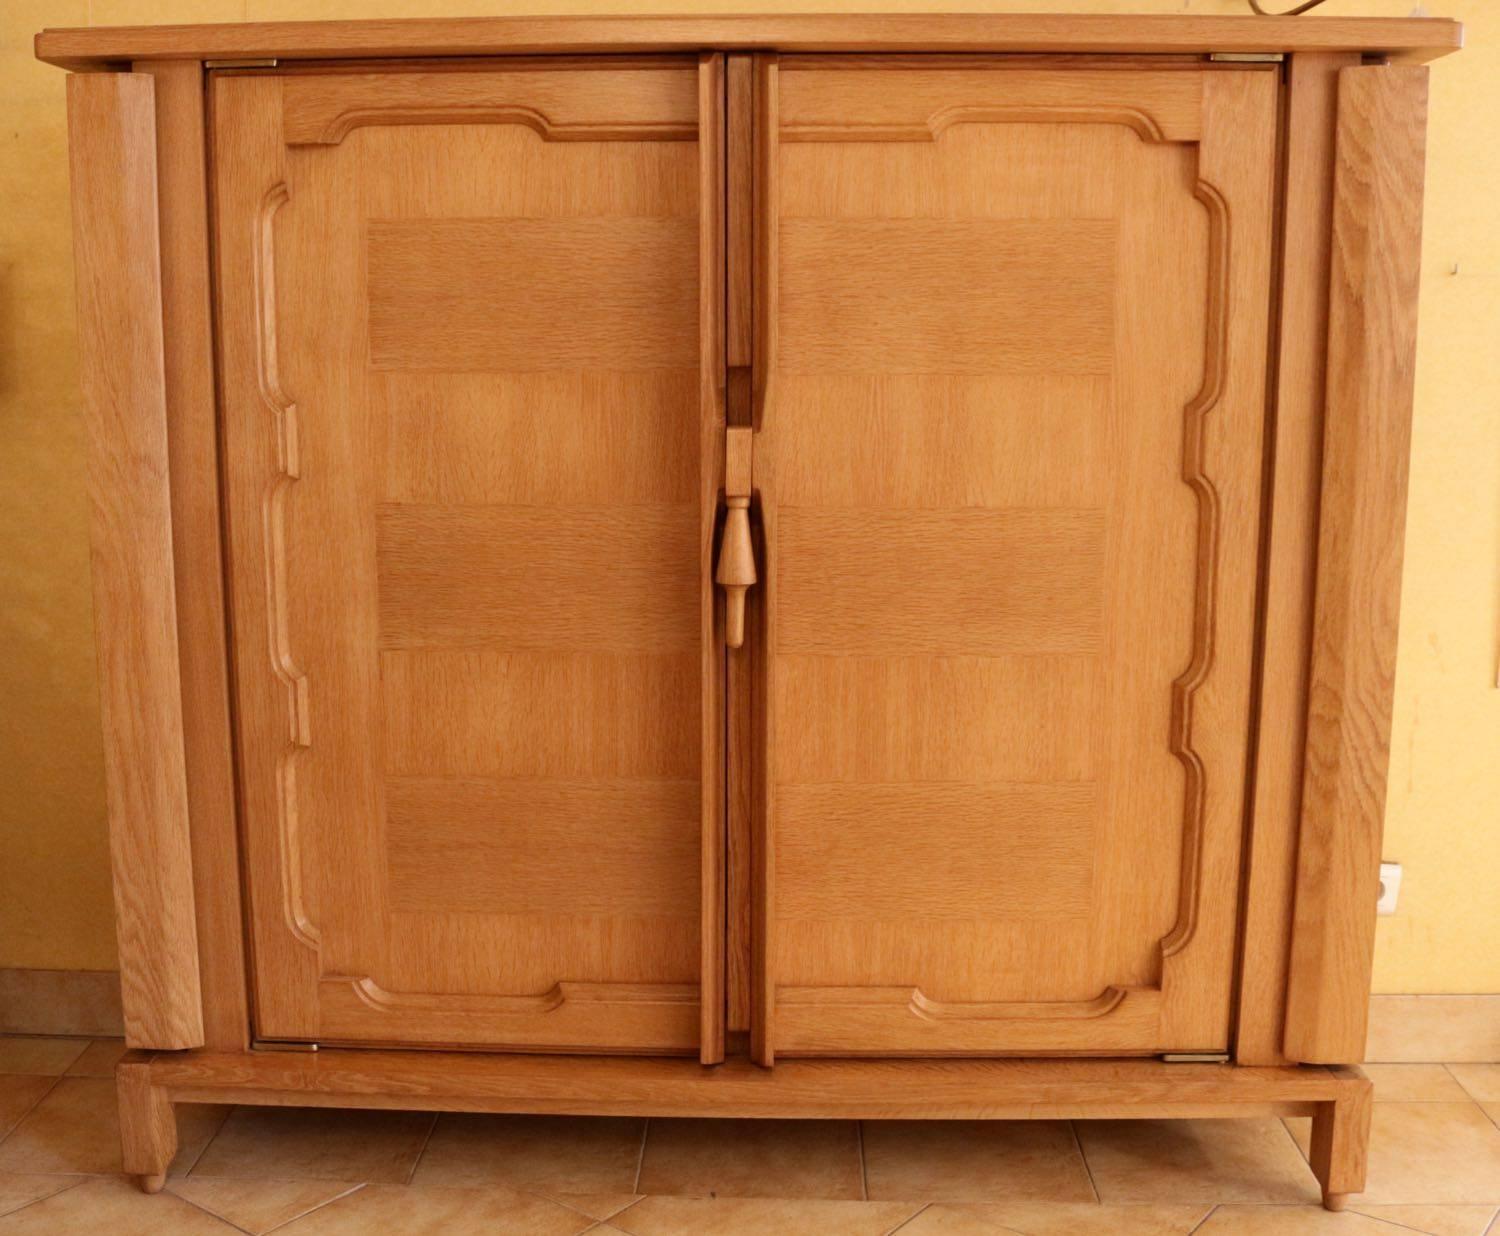 Natural oak cabinet or small dresser. Two carved front doors are opening on oak shelves. Two side doors are opening on shelves. An ergonomic handle is actioning a rack mechanism to lock and unlock the doors.
The cabinet stand on four oak